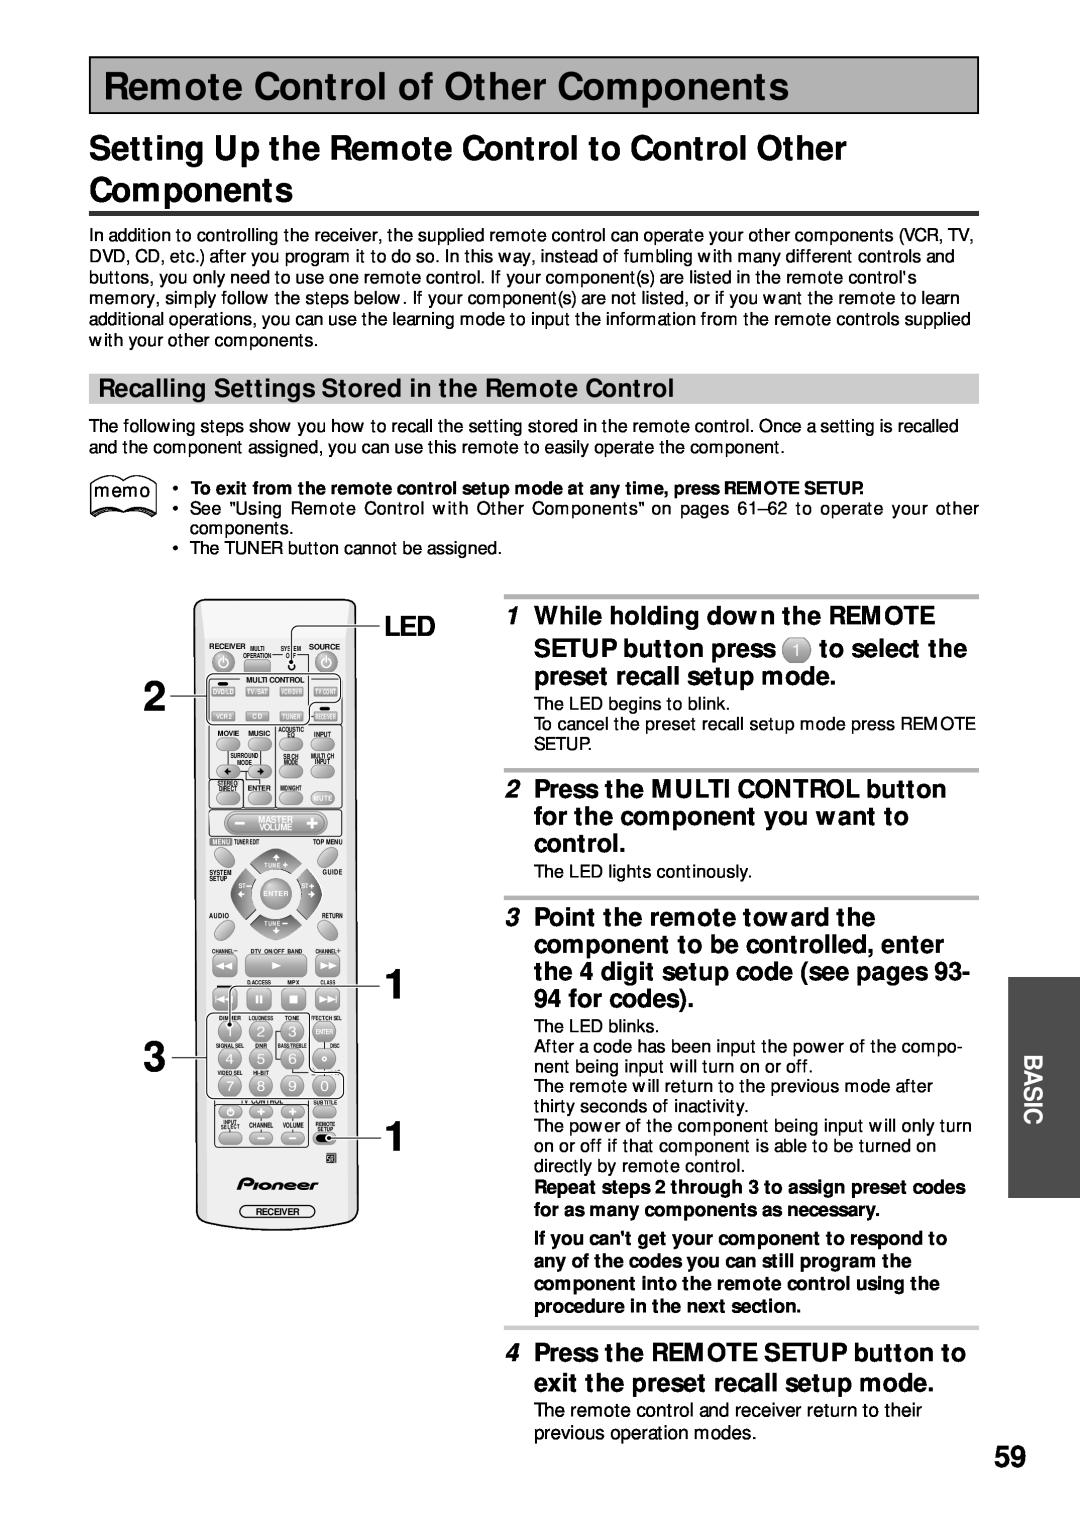 Pioneer VSX-43TX Remote Control of Other Components, Recalling Settings Stored in the Remote Control, control, for codes 